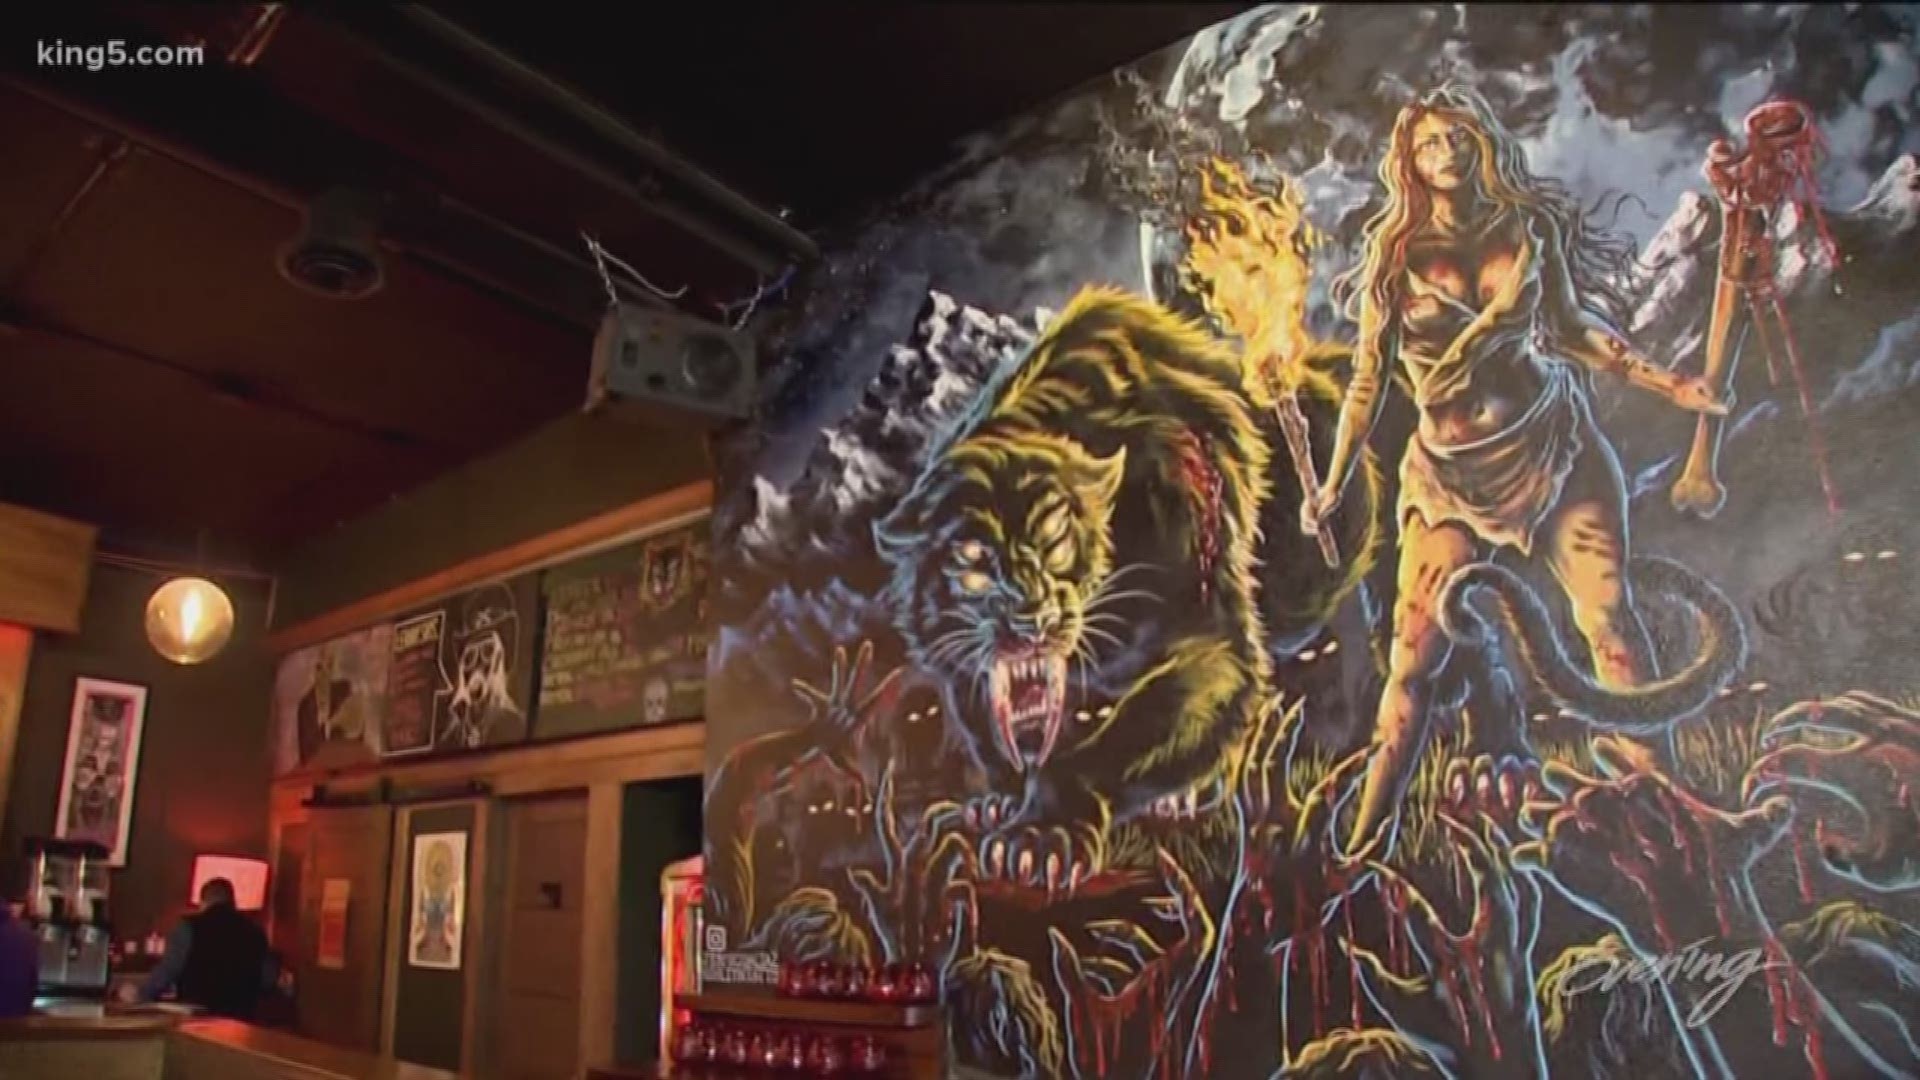 Located in Seattle's Belltown neighborhood, this dive bar is "not too divey," according to its regulars.